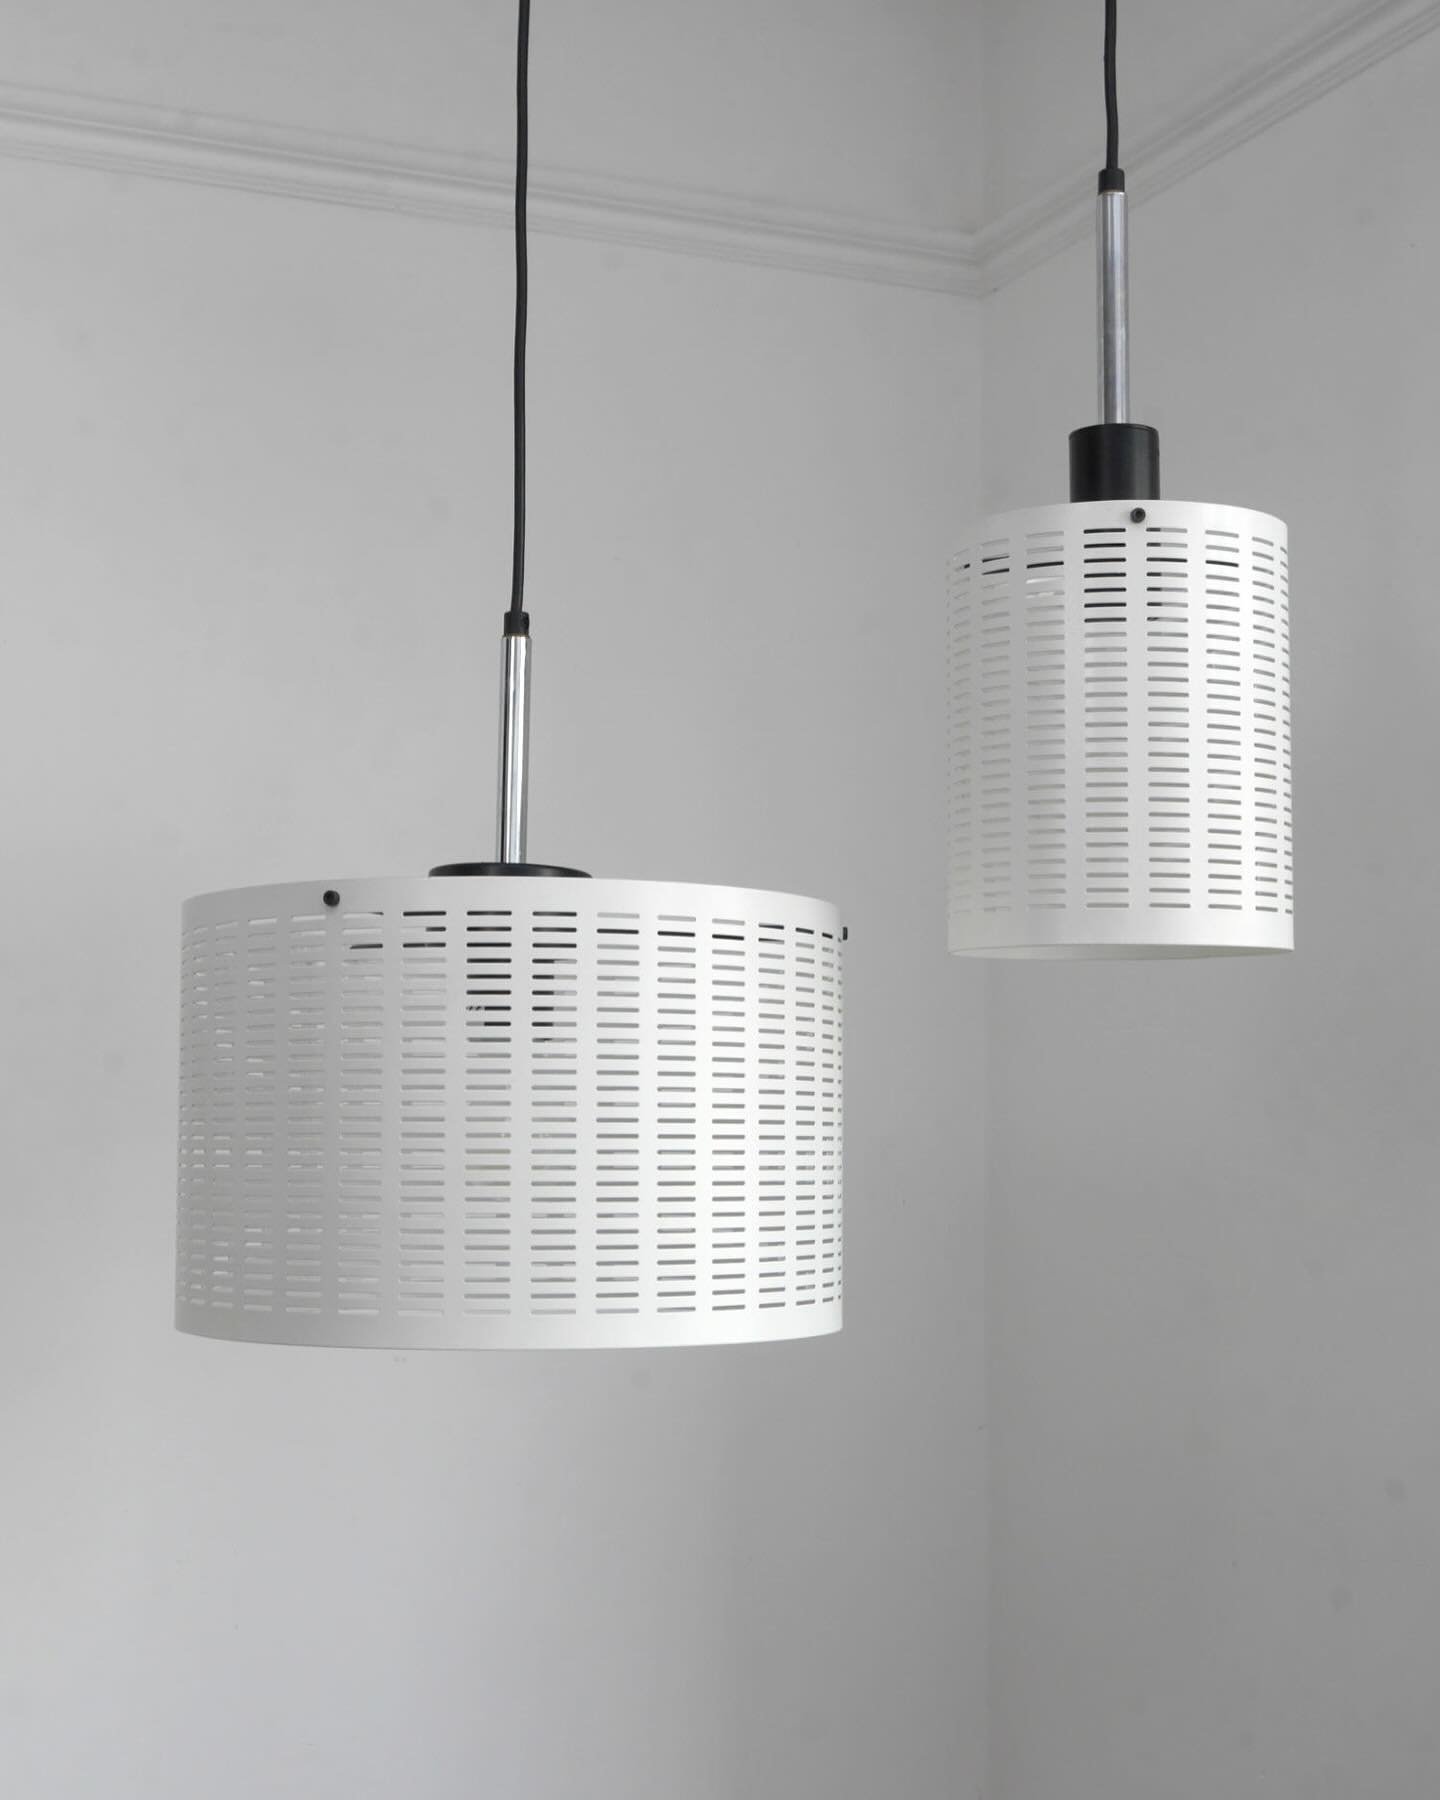 Apollo pendant lights designed in 1998 by Robert Welch and made by Chad Lighting, Birmingham, UK. No longer in production, these are new old stock.

Perforated white enamelled steel shade with black and stainless steel fittings.

&pound;195 for the l